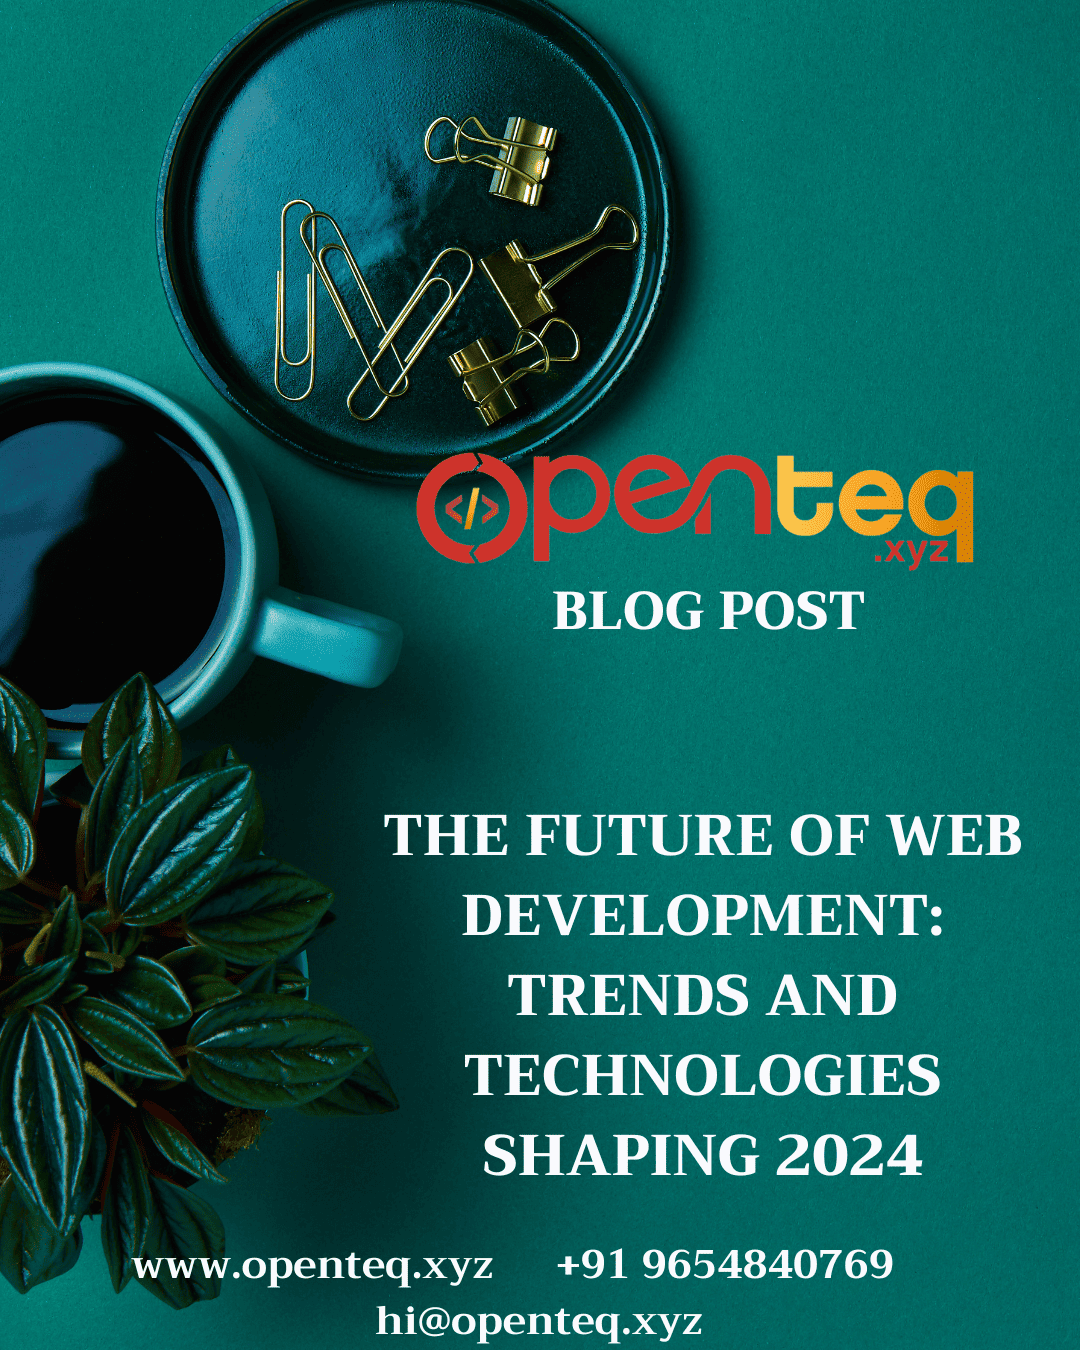 The Future of Web Development: Trends and Technologies Shaping 2024